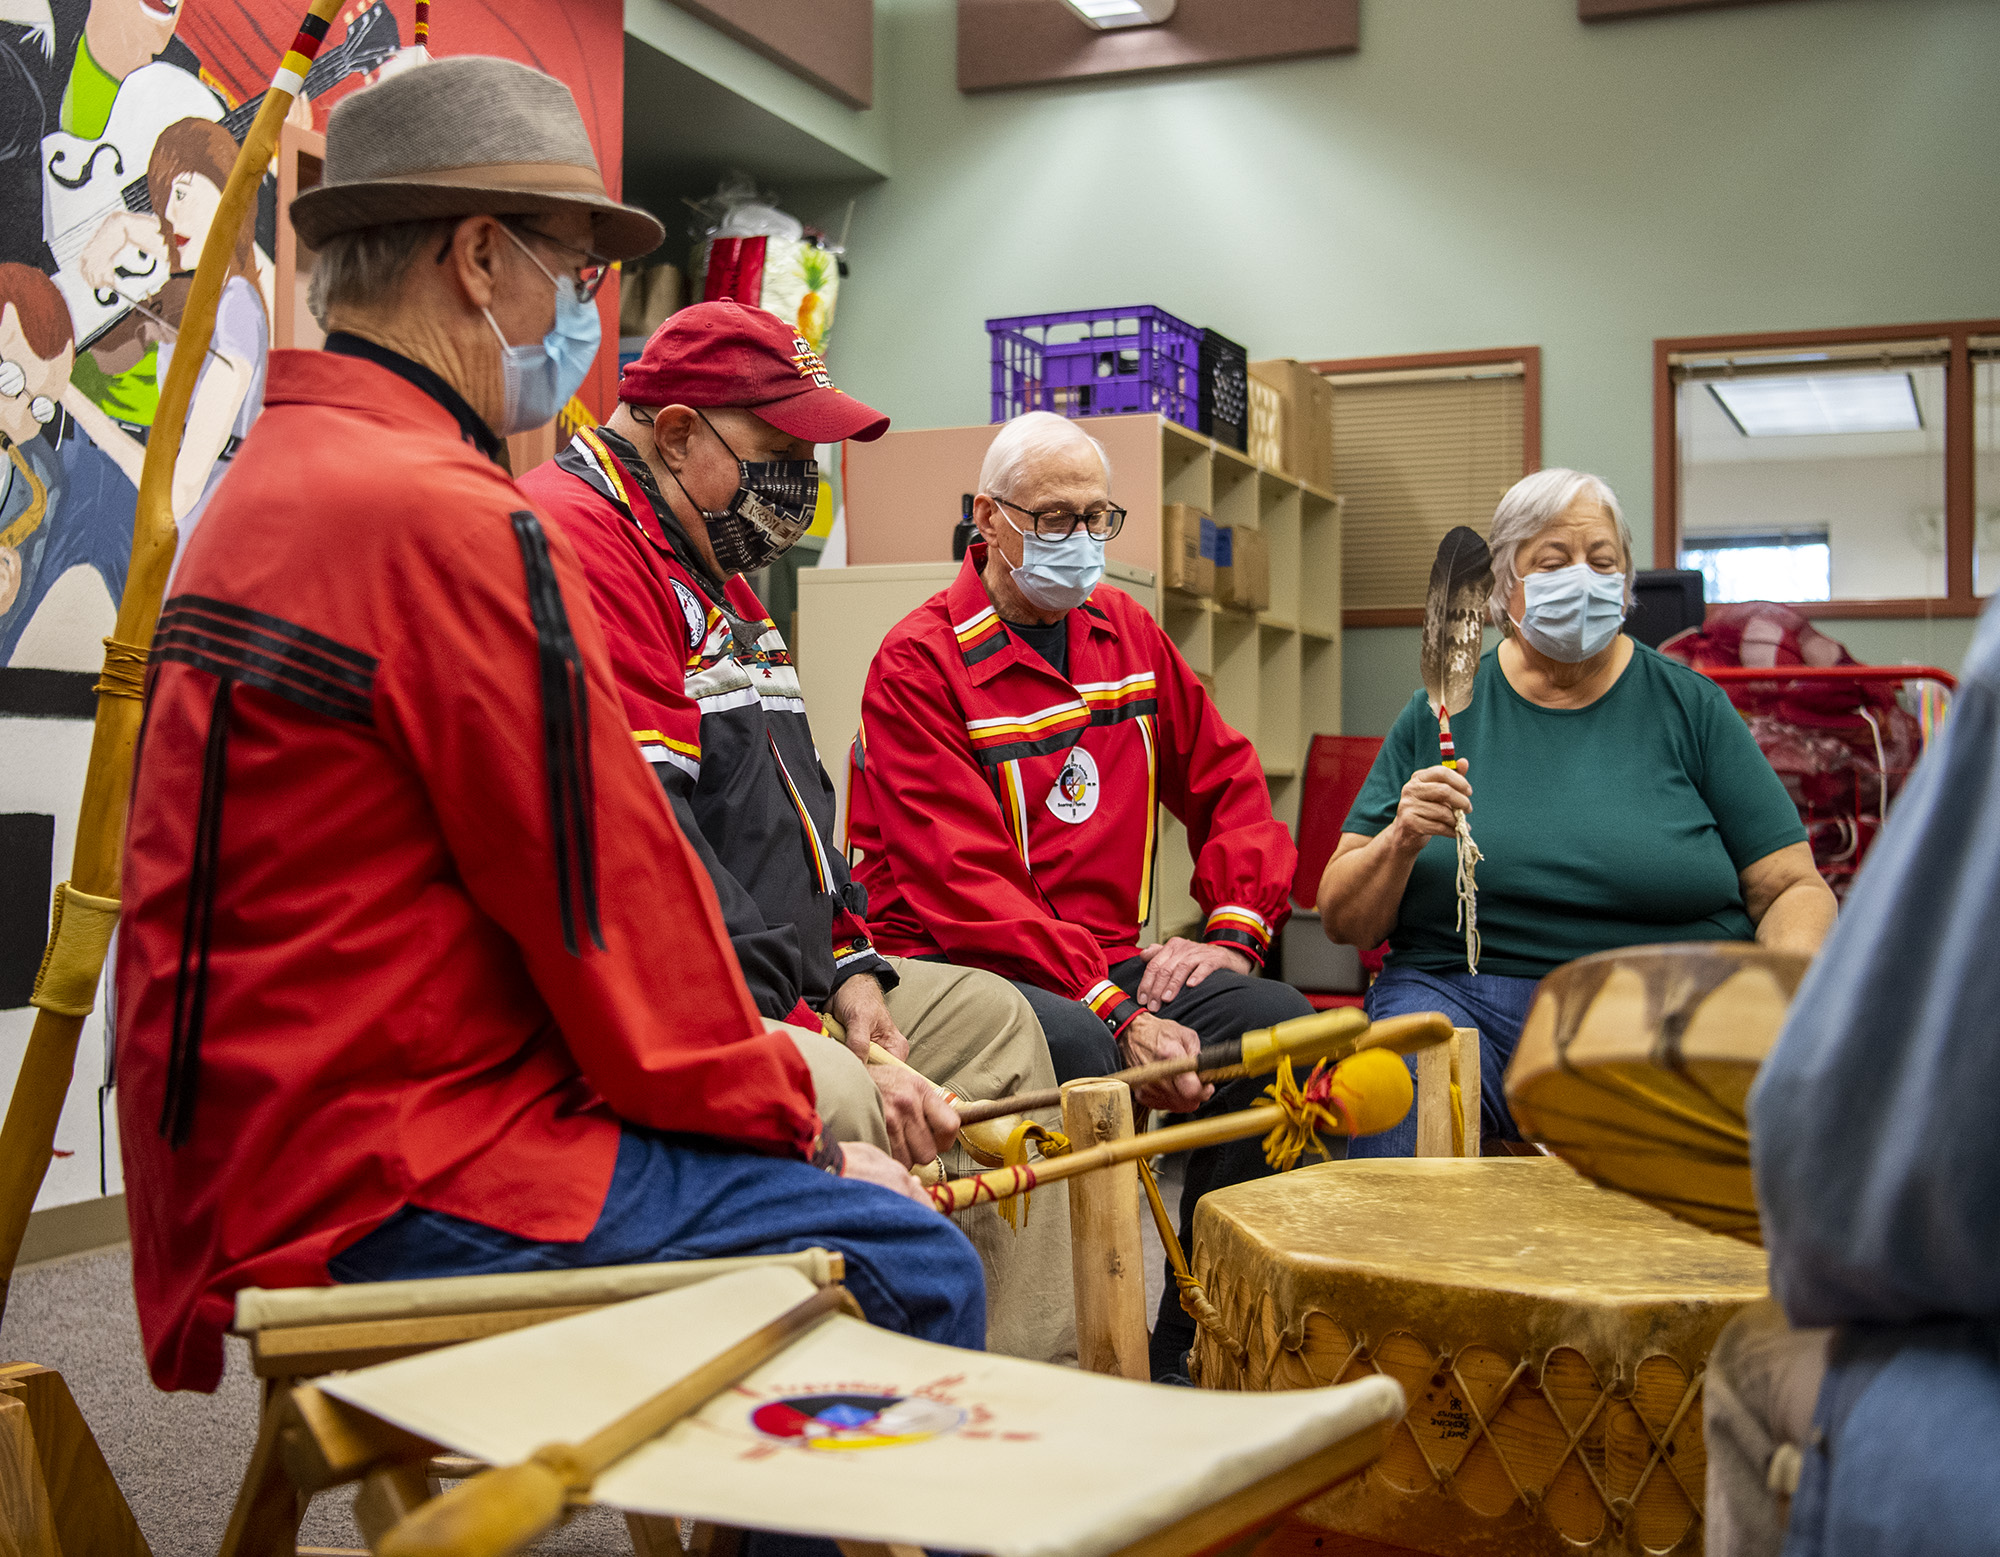 The Traveling Day Society plays a song Tuesday, Nov. 23, 2021, at Lincoln Elementary School. The inter-tribal Native American group was part of a virtual assembly at Lincoln elementary school.